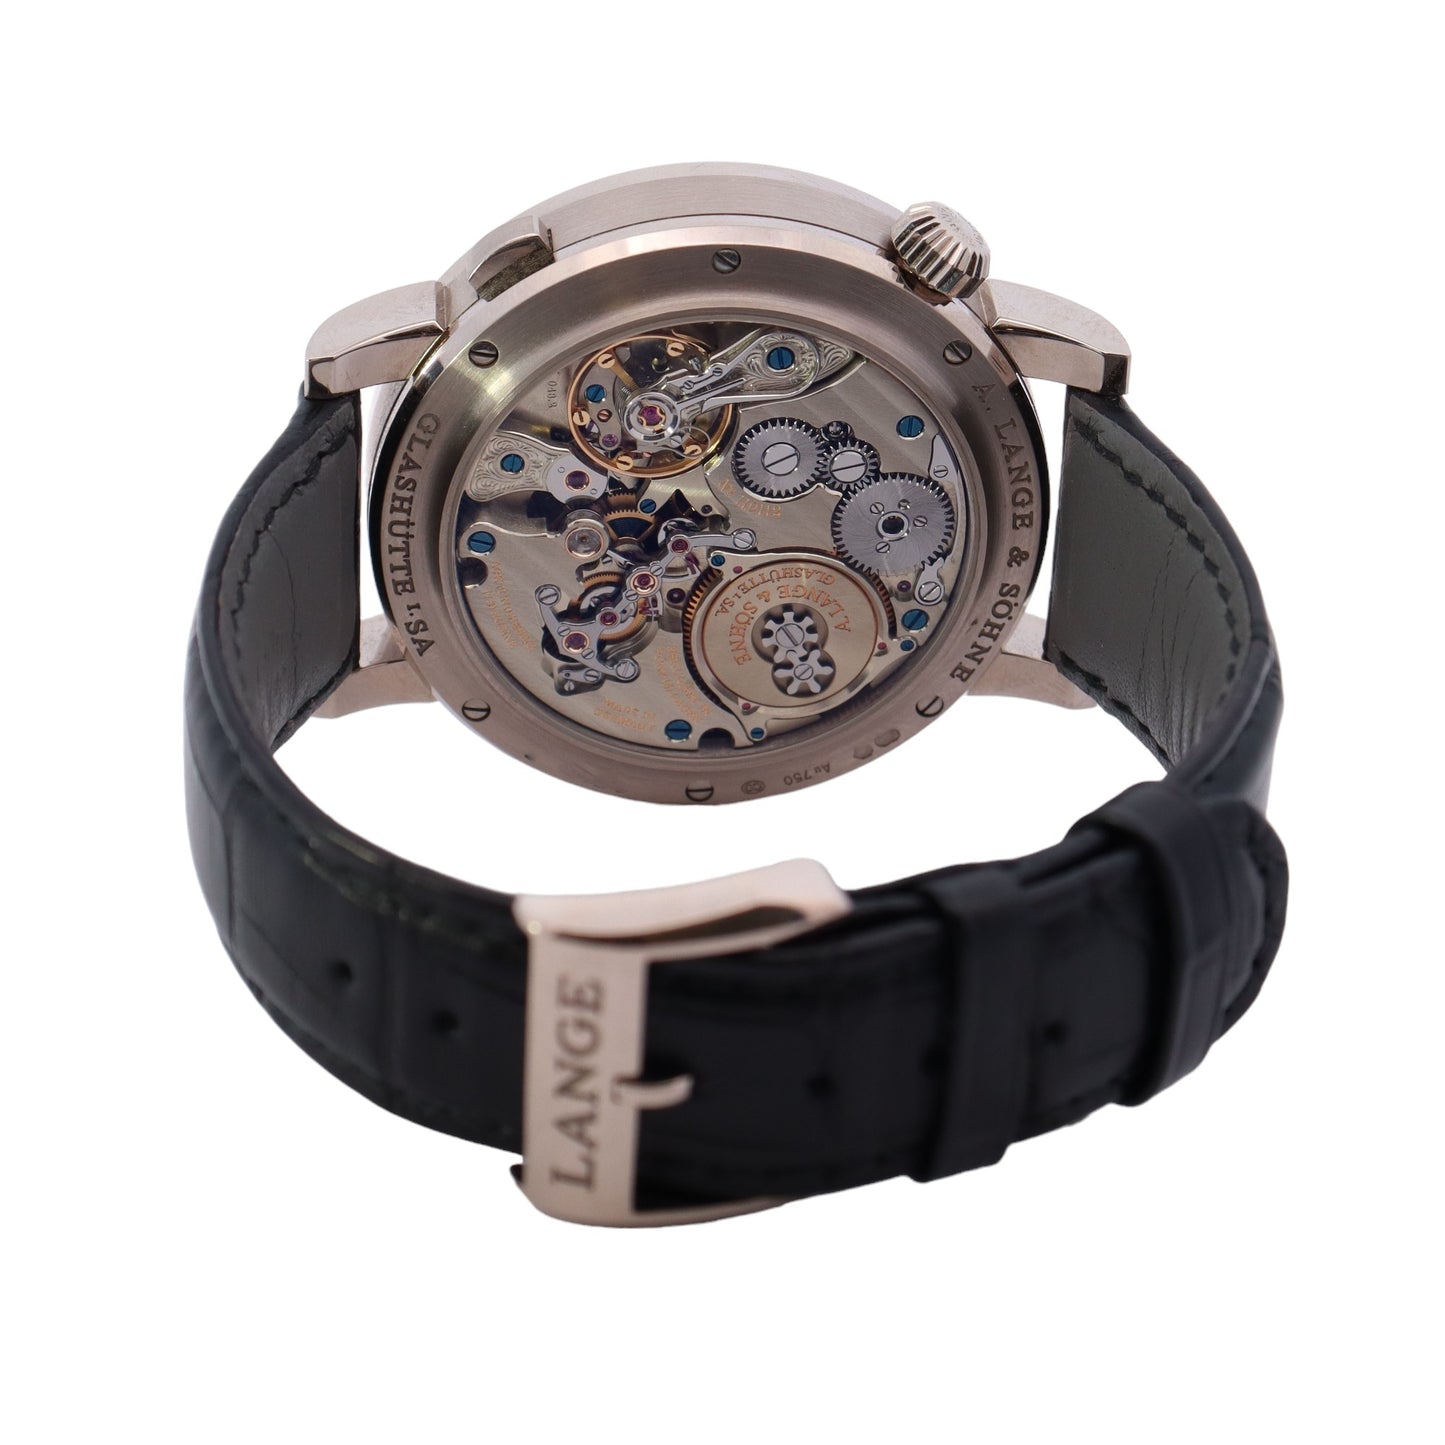 A.Lange and Sohne Zeitwerk Striking Time White Gold 44mm Black Dial Watch Reference #: 145.029